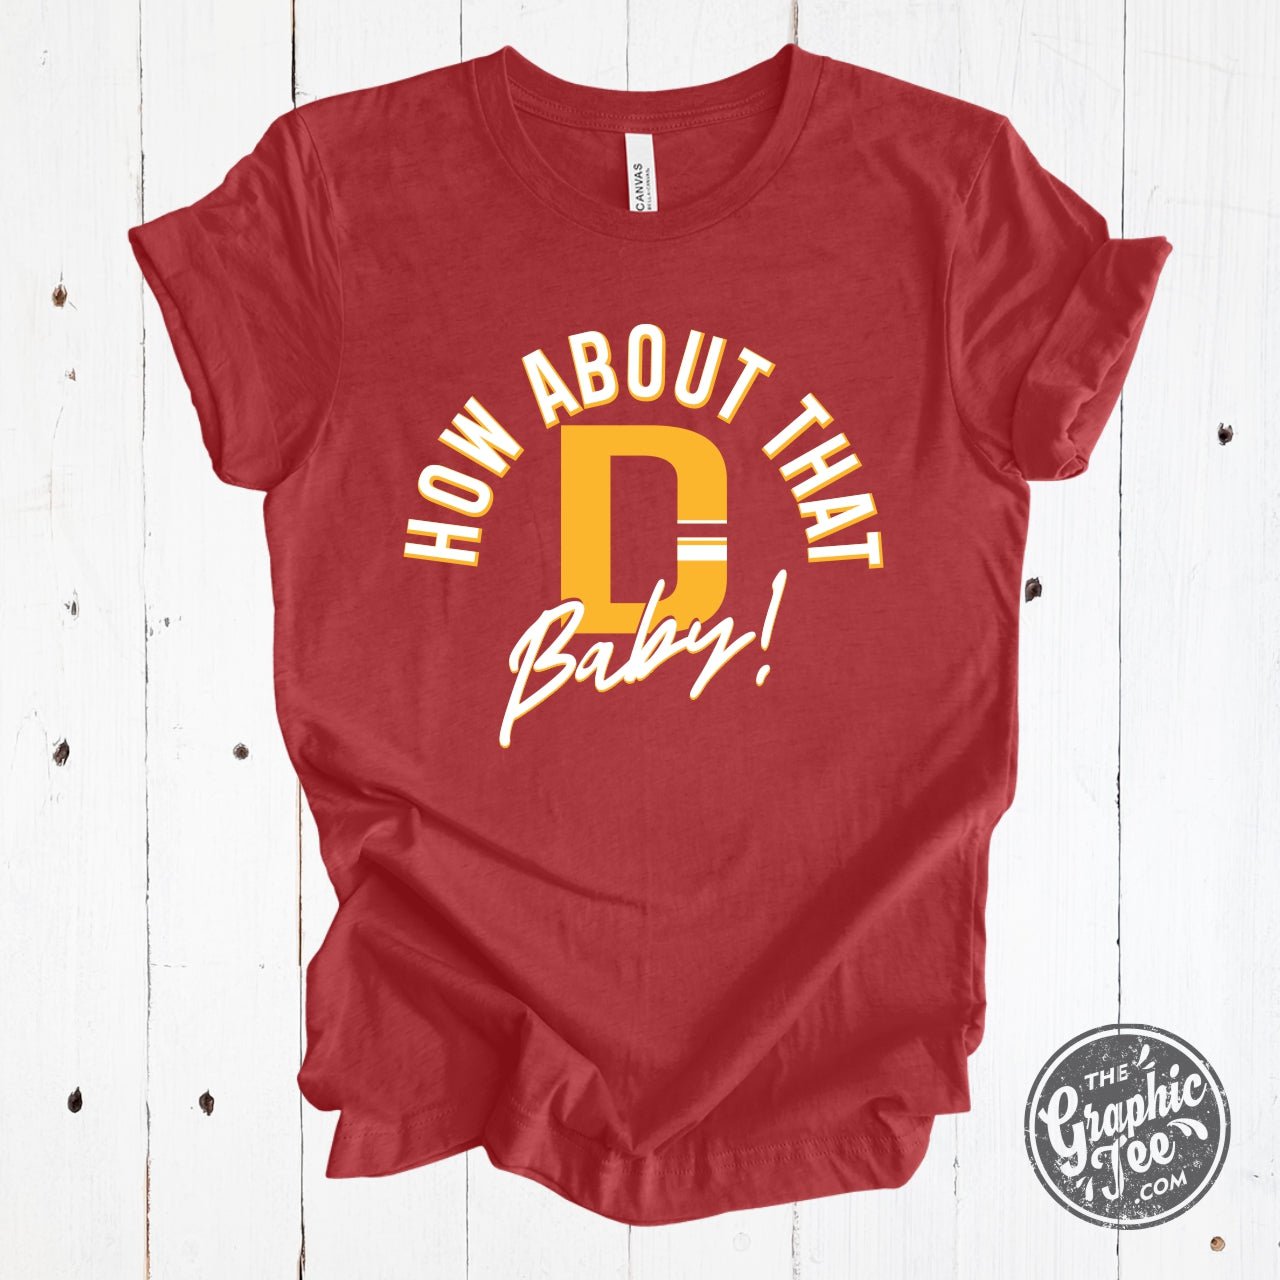 How About That D Baby! Crewneck Tee - The Graphic Tee